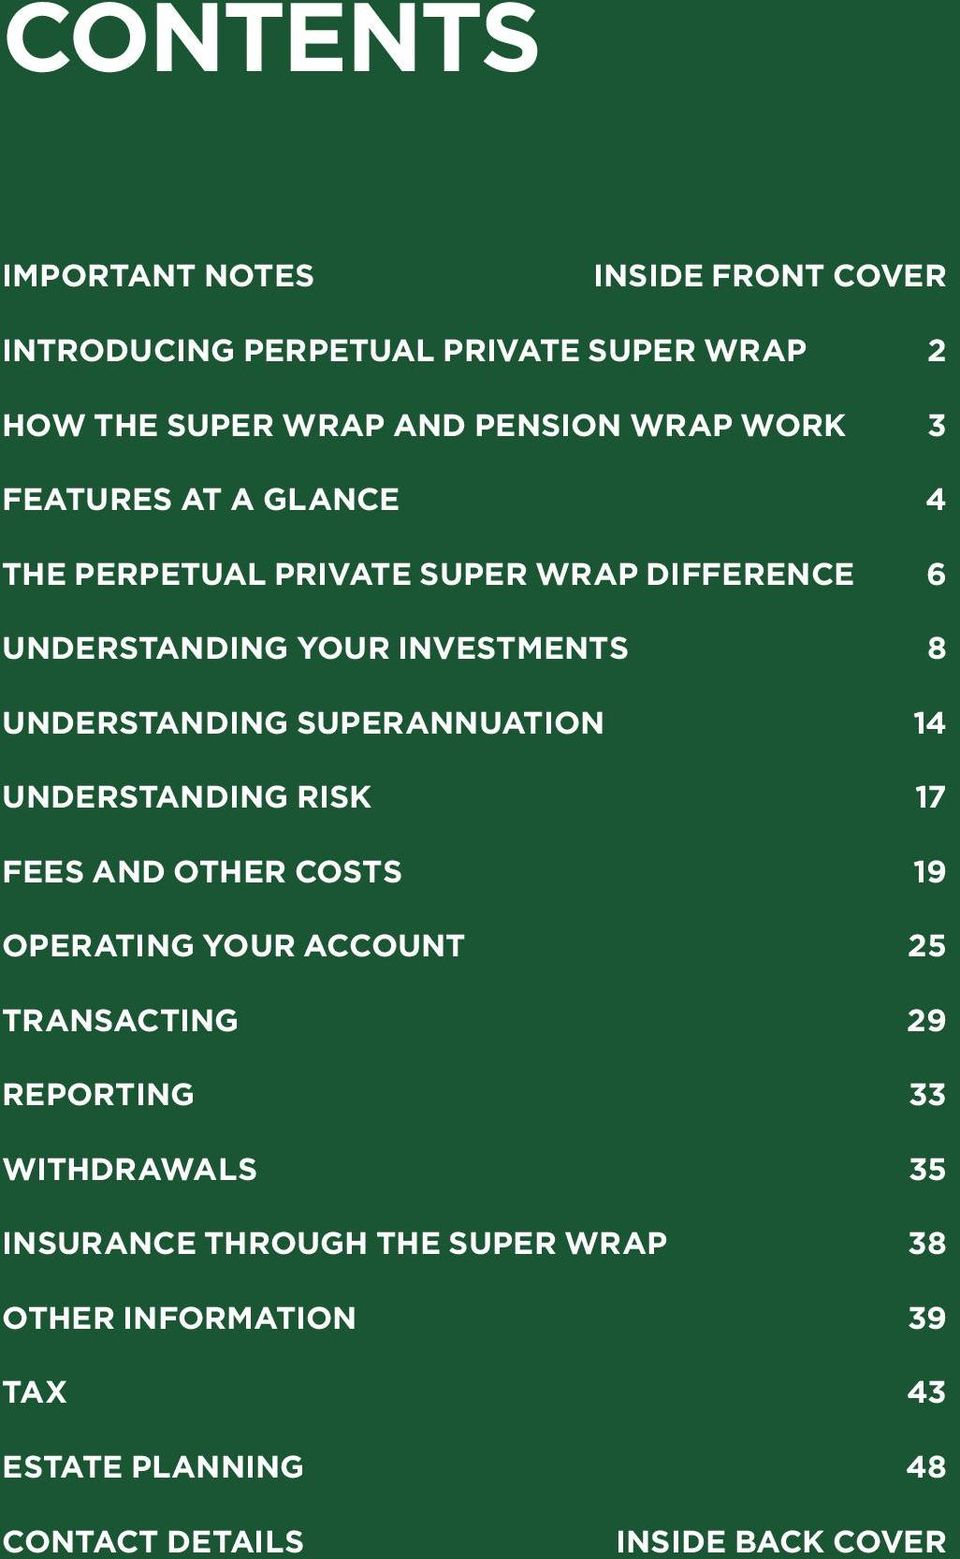 SUPERANNUATION 14 UNDERSTANDING RISK 17 FEES AND OTHER COSTS 19 OPERATING YOUR ACCOUNT 25 TRANSACTING 29 REPORTING 33